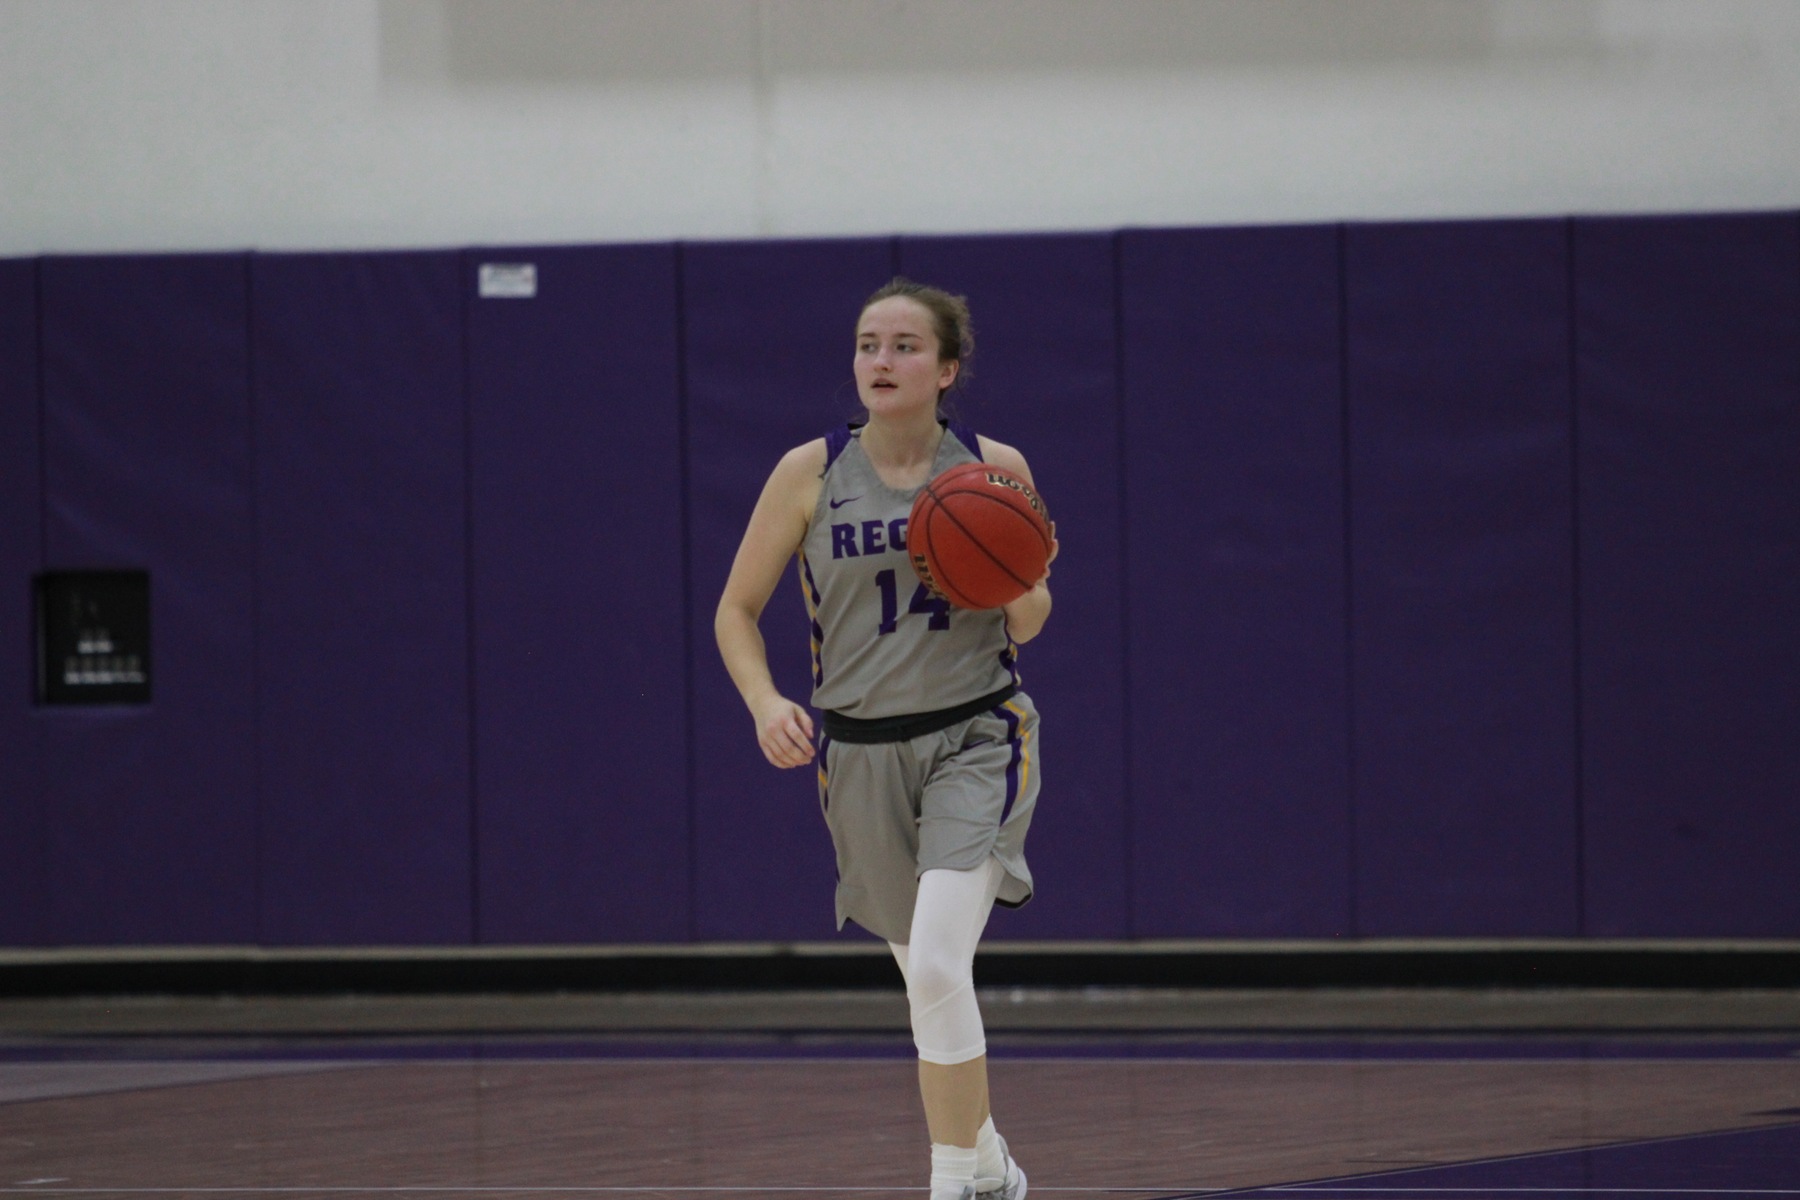 Natalie Ruhl dropped a team-high 11 points in the Regals' defeat Friday morning. (Photo Credit: Gabby Flores)